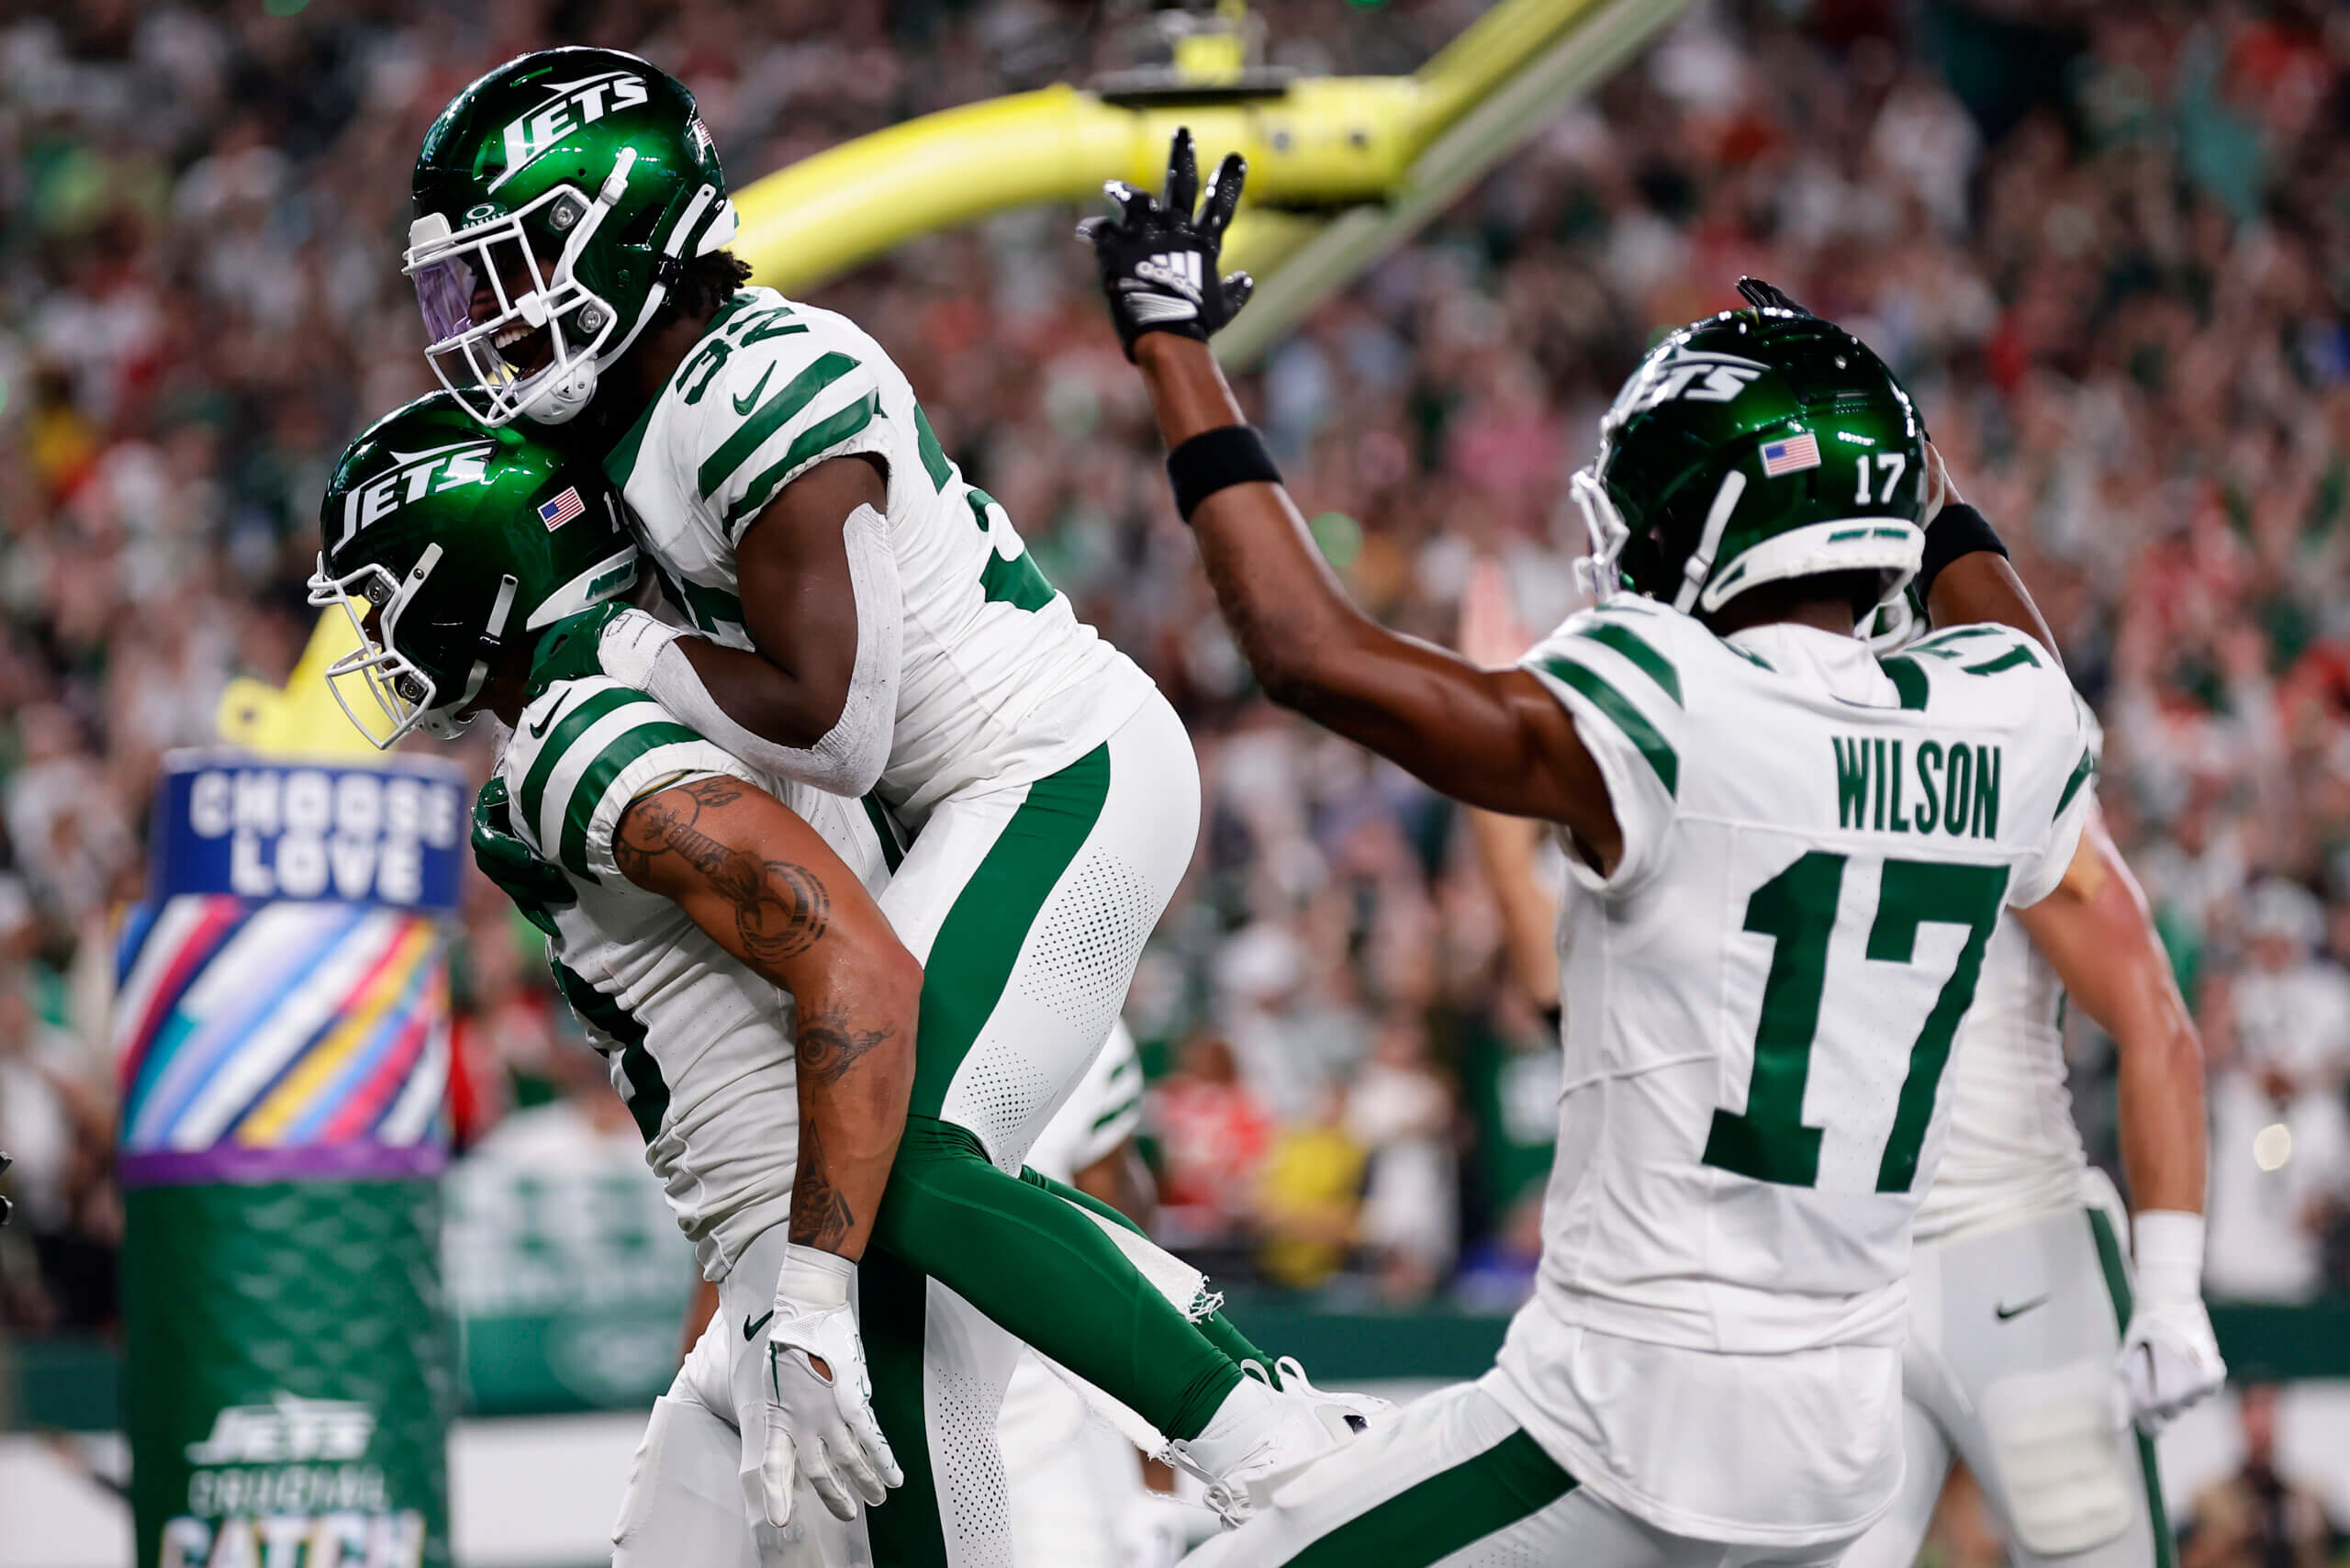 Jets defense force 3 interceptions to hand Eagles 1st loss of season